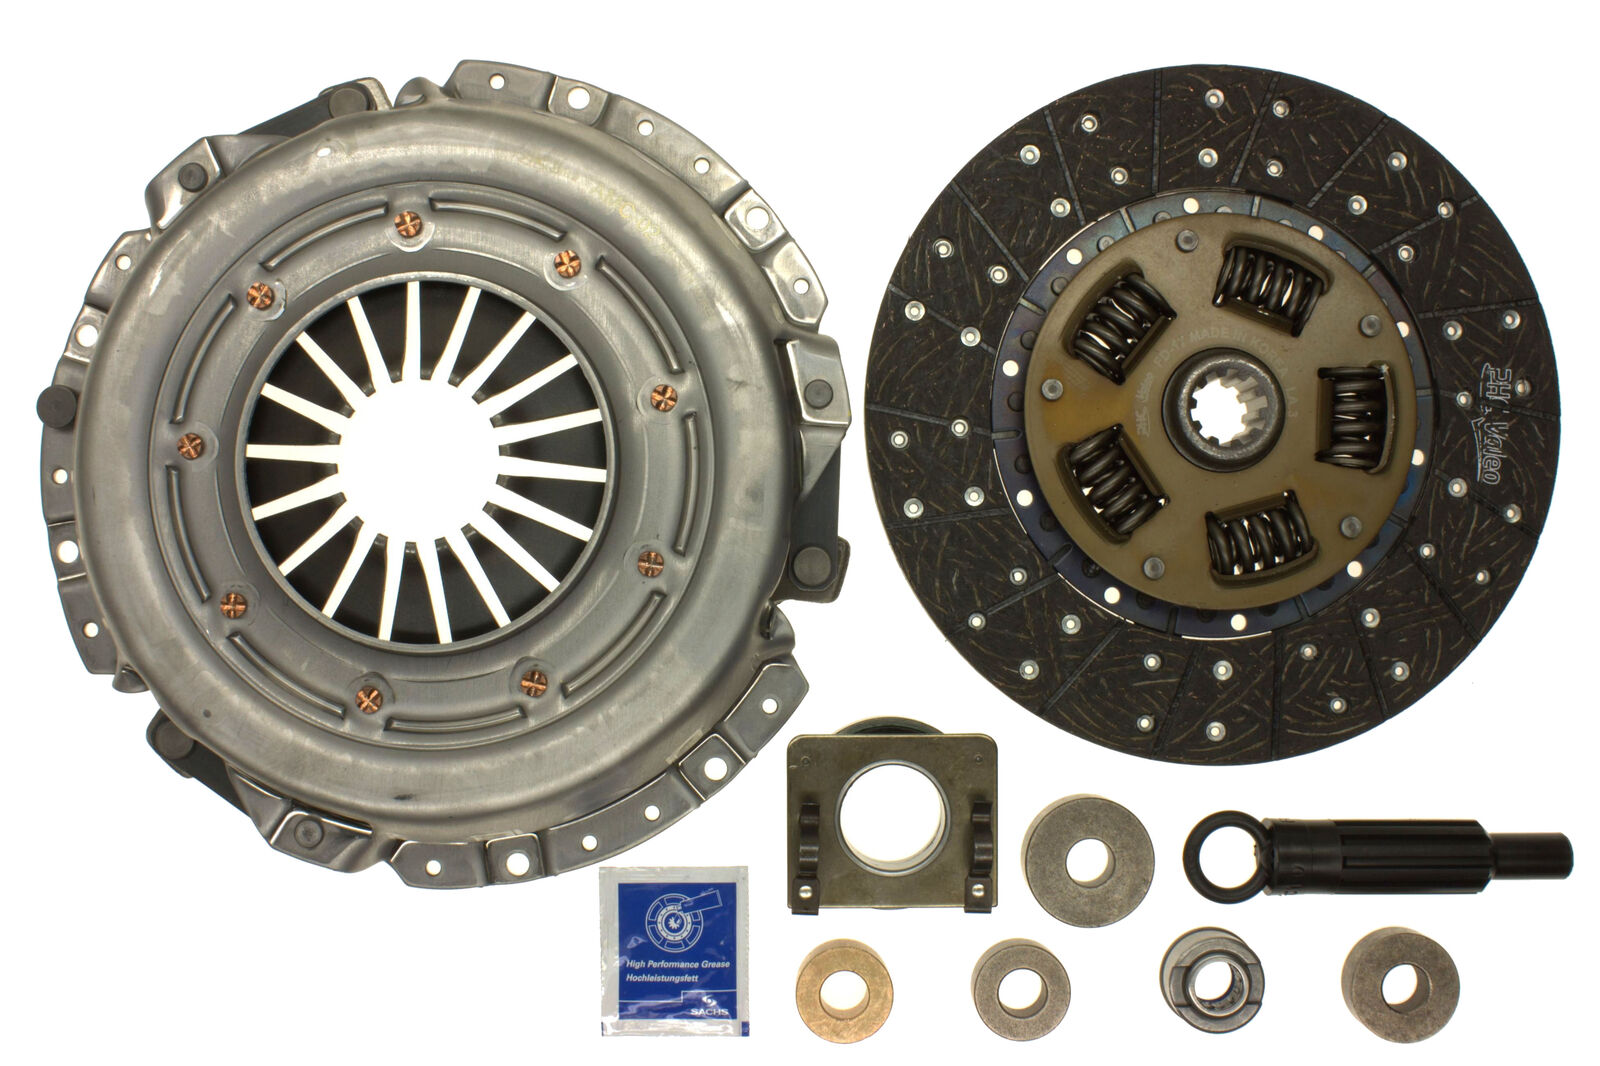  Clutch Kit for Ford Mustang 1965 - 1973 & Others SACHS Xtend K0030-04